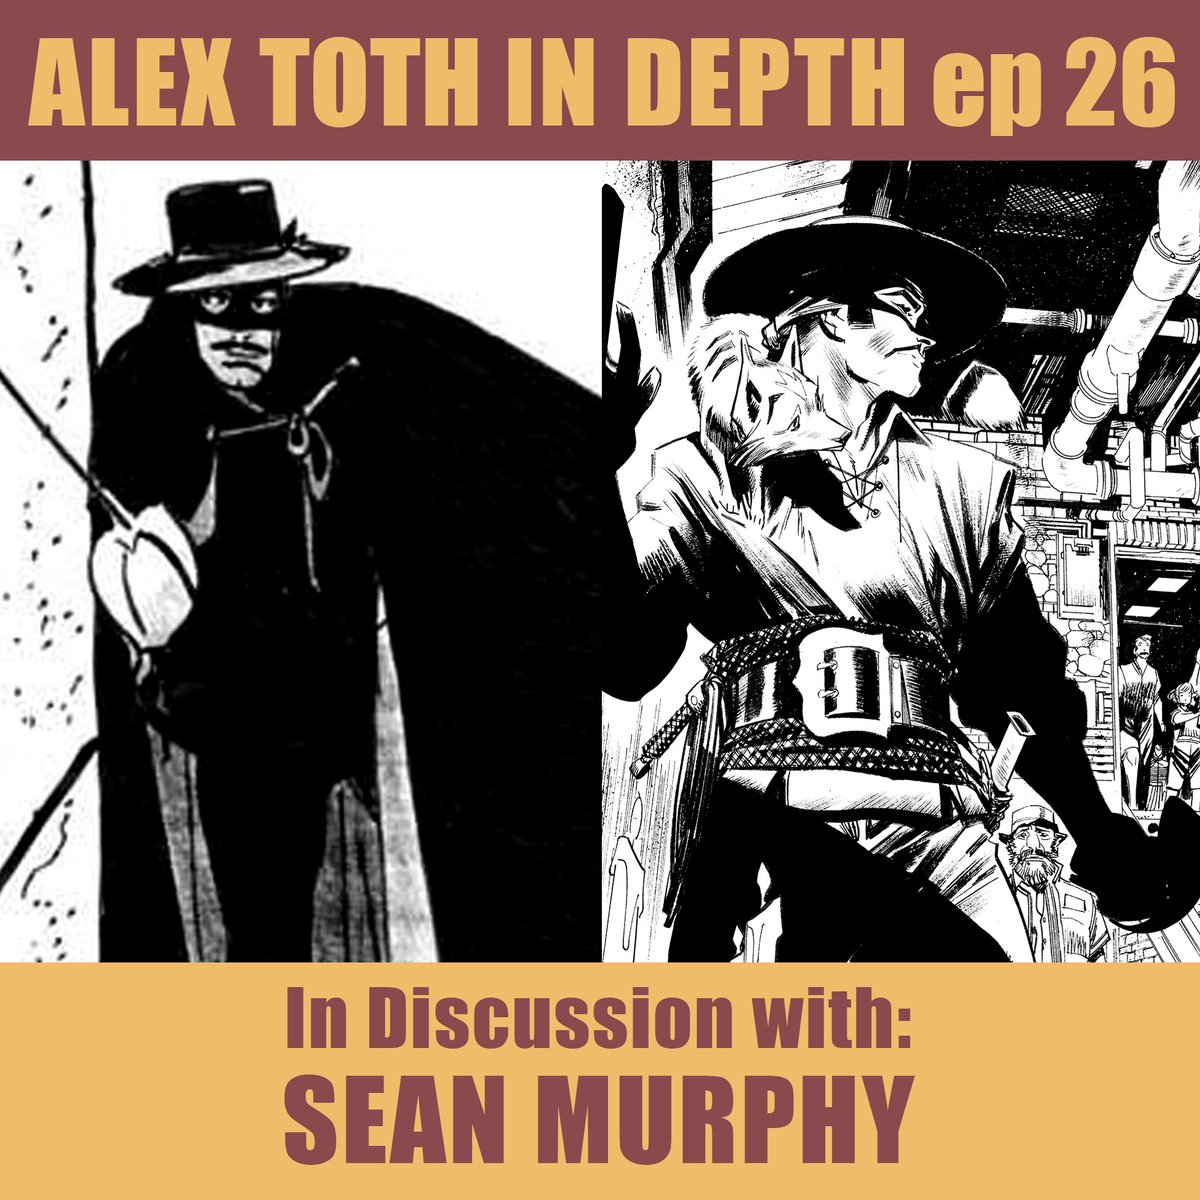 Sean Murphy joins me to talk Zorro, crowdfunding, career management, Toth's thinking, and the dream projects we'd choose for Alex.

Support Sean's Zorro: Man of the Dead GN on Kickstarter: kck.st/46jOh5g

Watch: youtu.be/49TLYmA72Lw?si…

Listen: buzzsprout.com/1180517/138459…